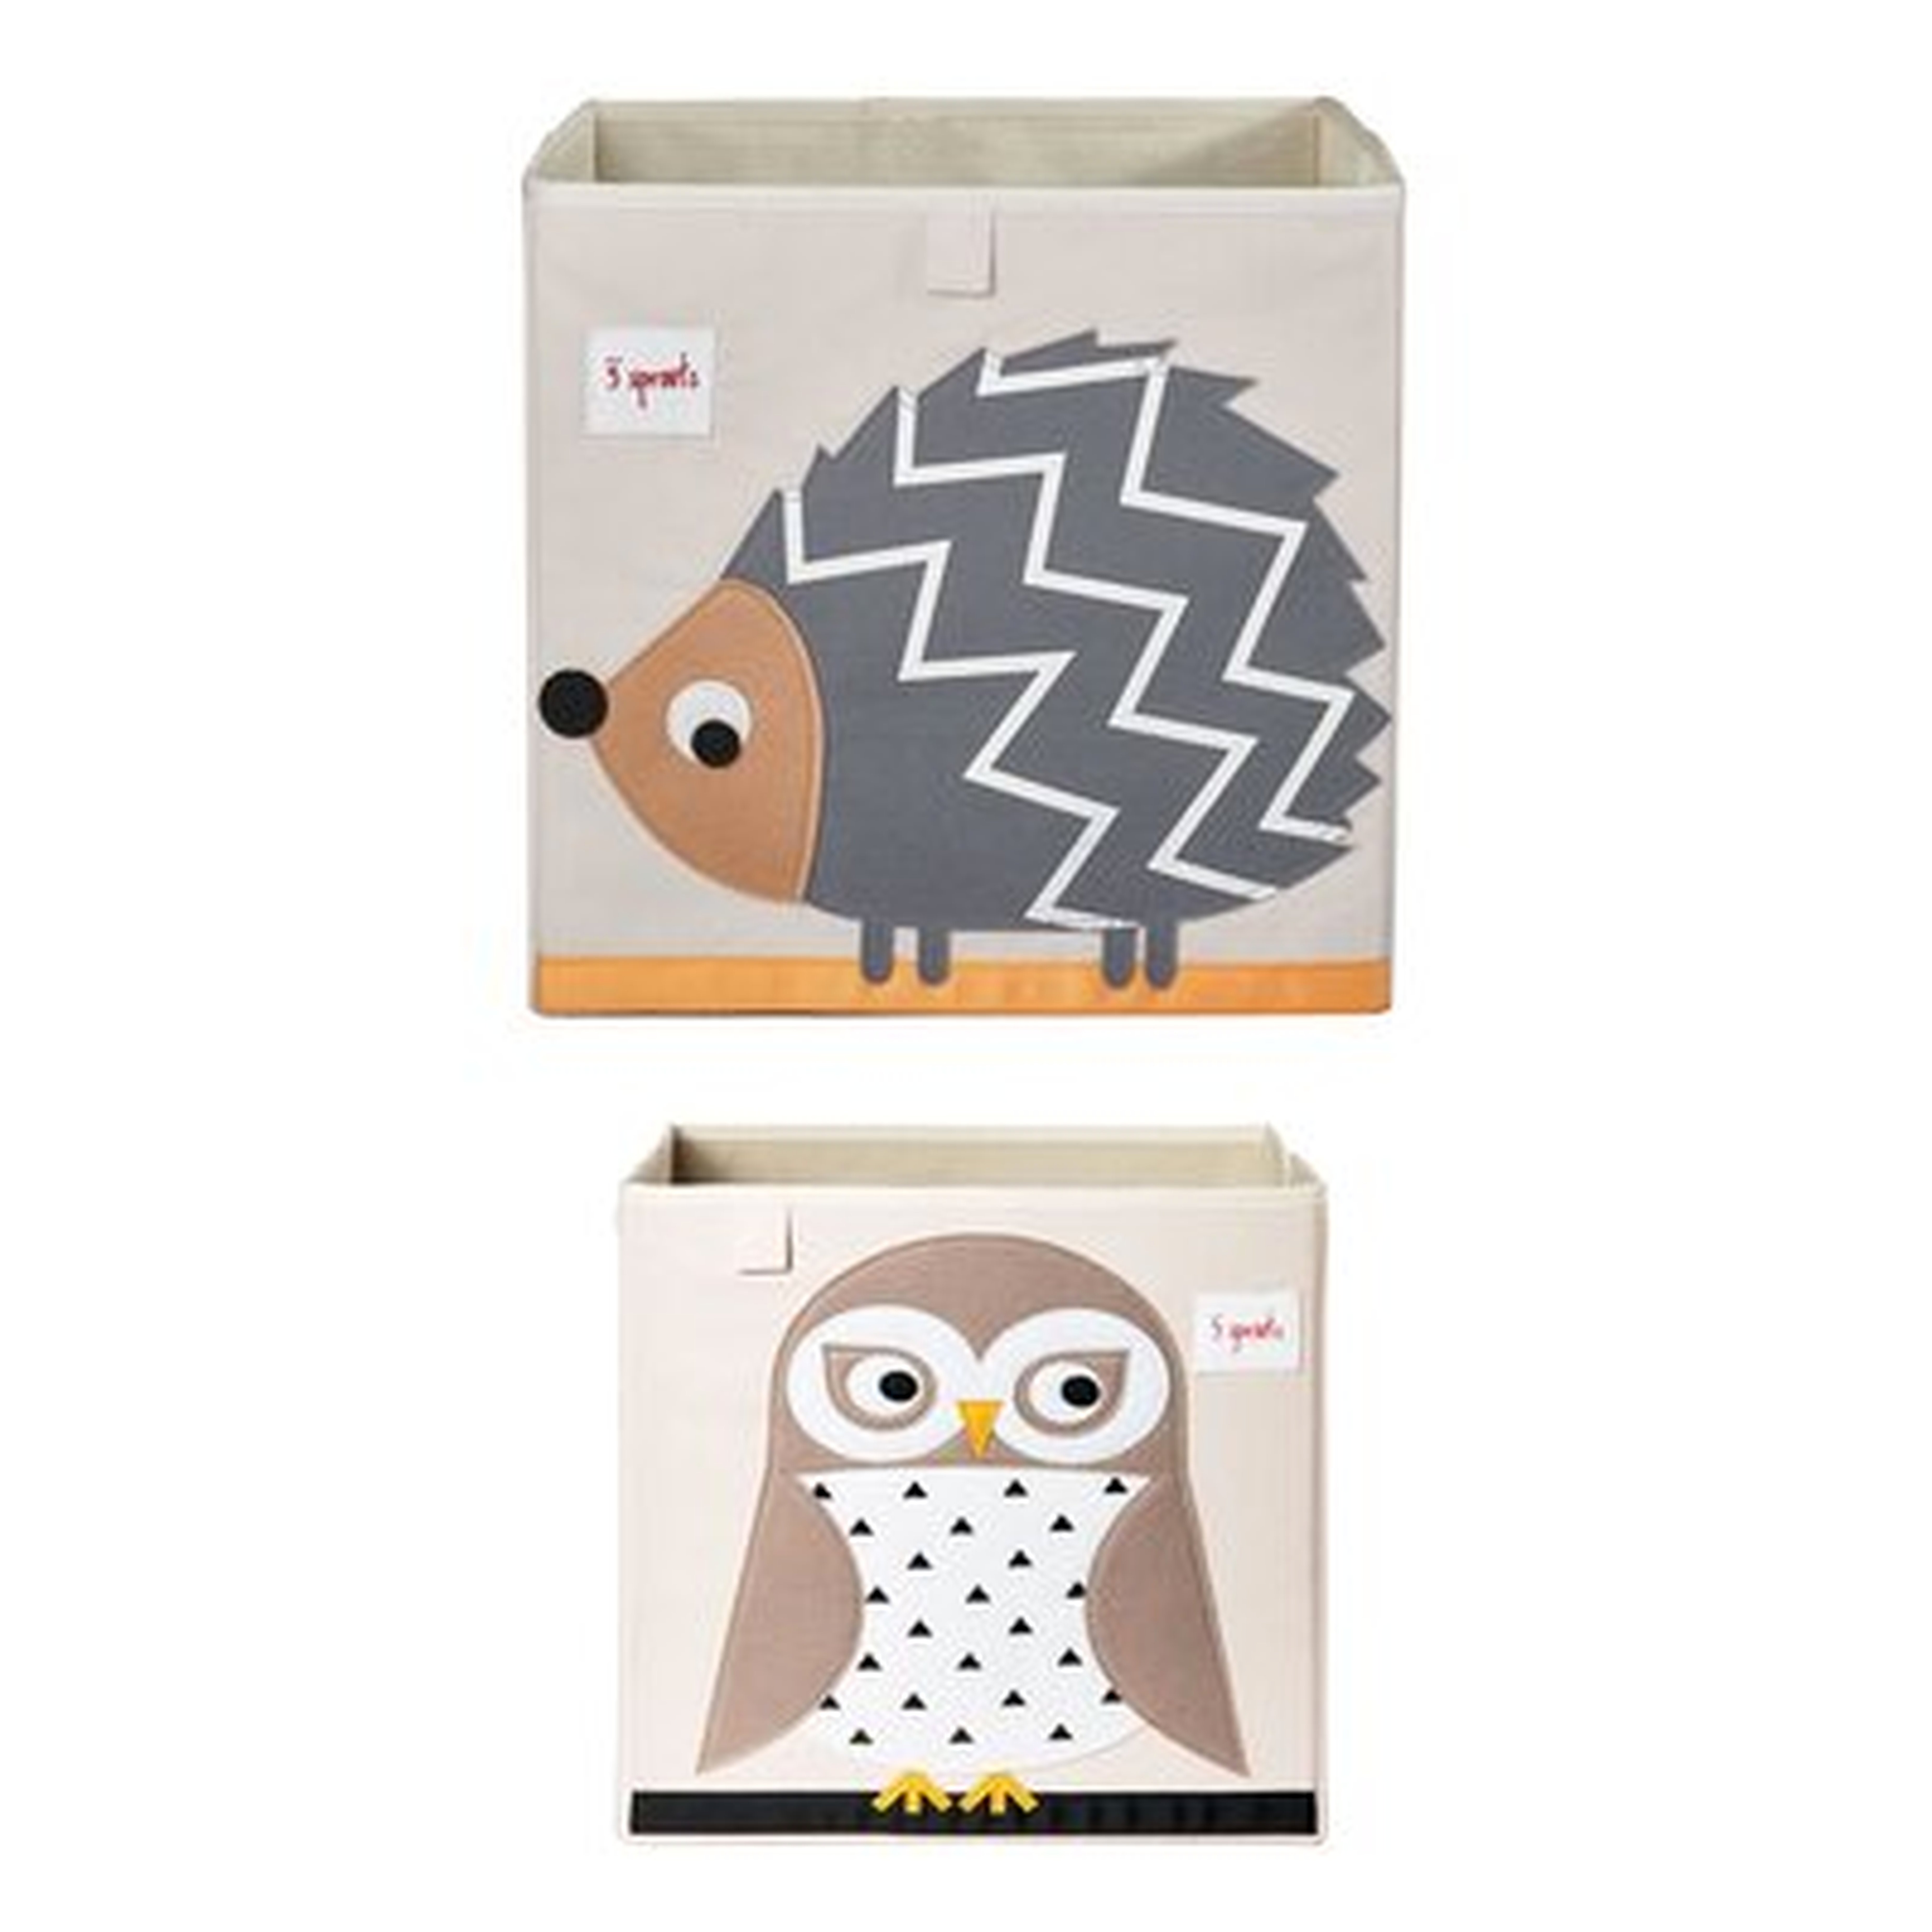 3 Sprouts Children's Foldable Fabric Storage Box Soft Toy Bins, Hedgehog And Owl - Wayfair